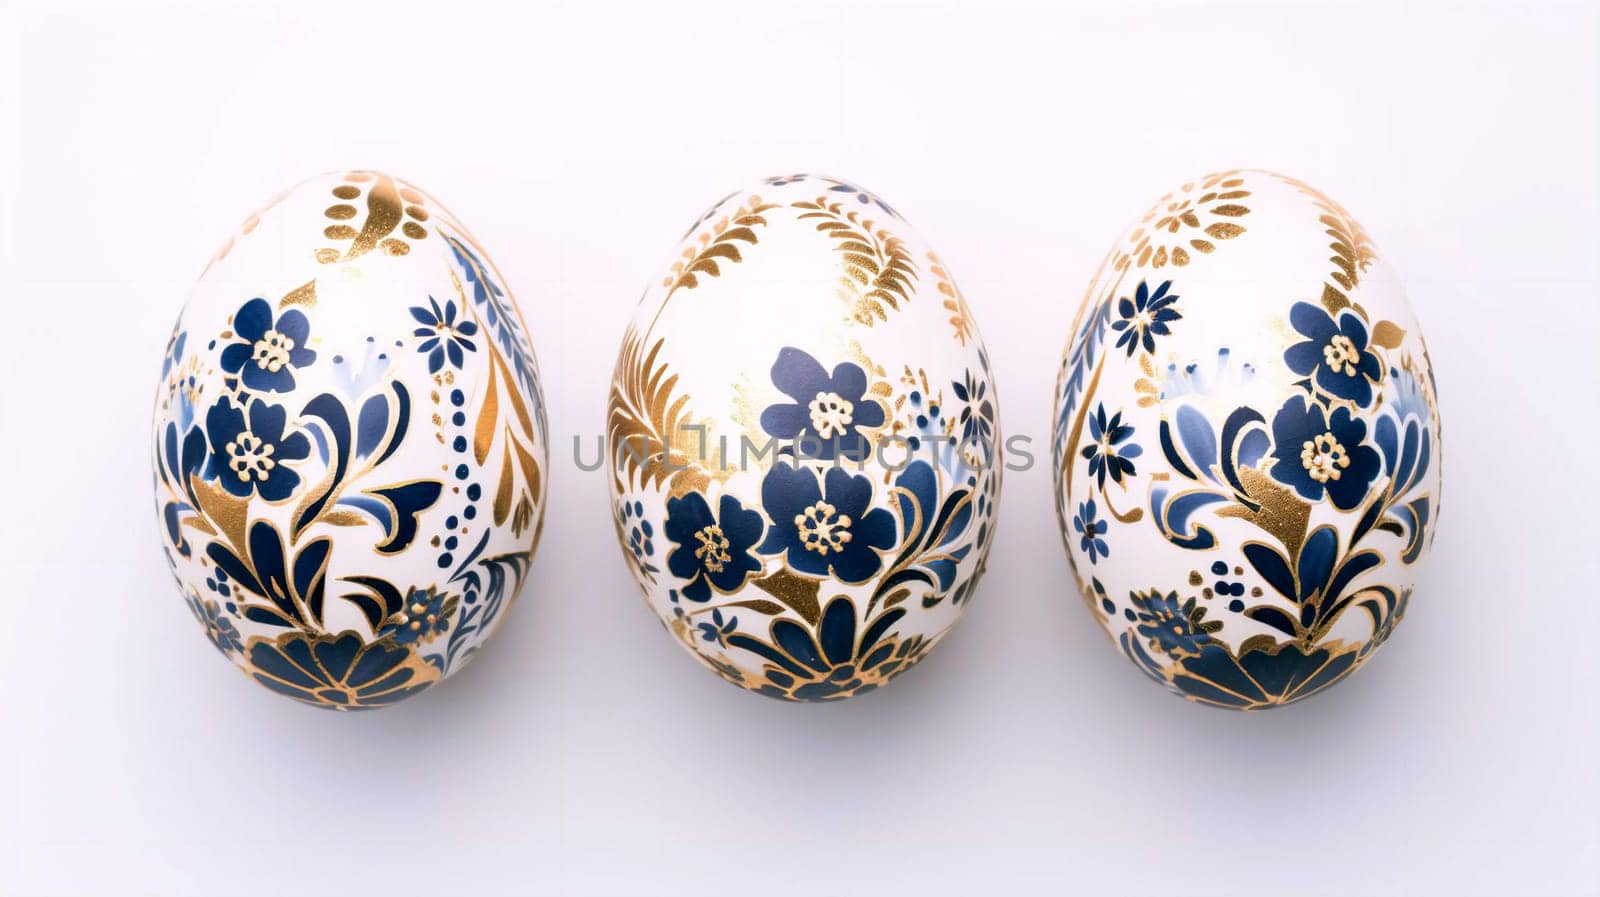 three painted Easter eggs with a blue and gold pattern are made in fashionable classic blue and gold tones, decorated with an Easter pattern on a white background. Easter Greeting Card